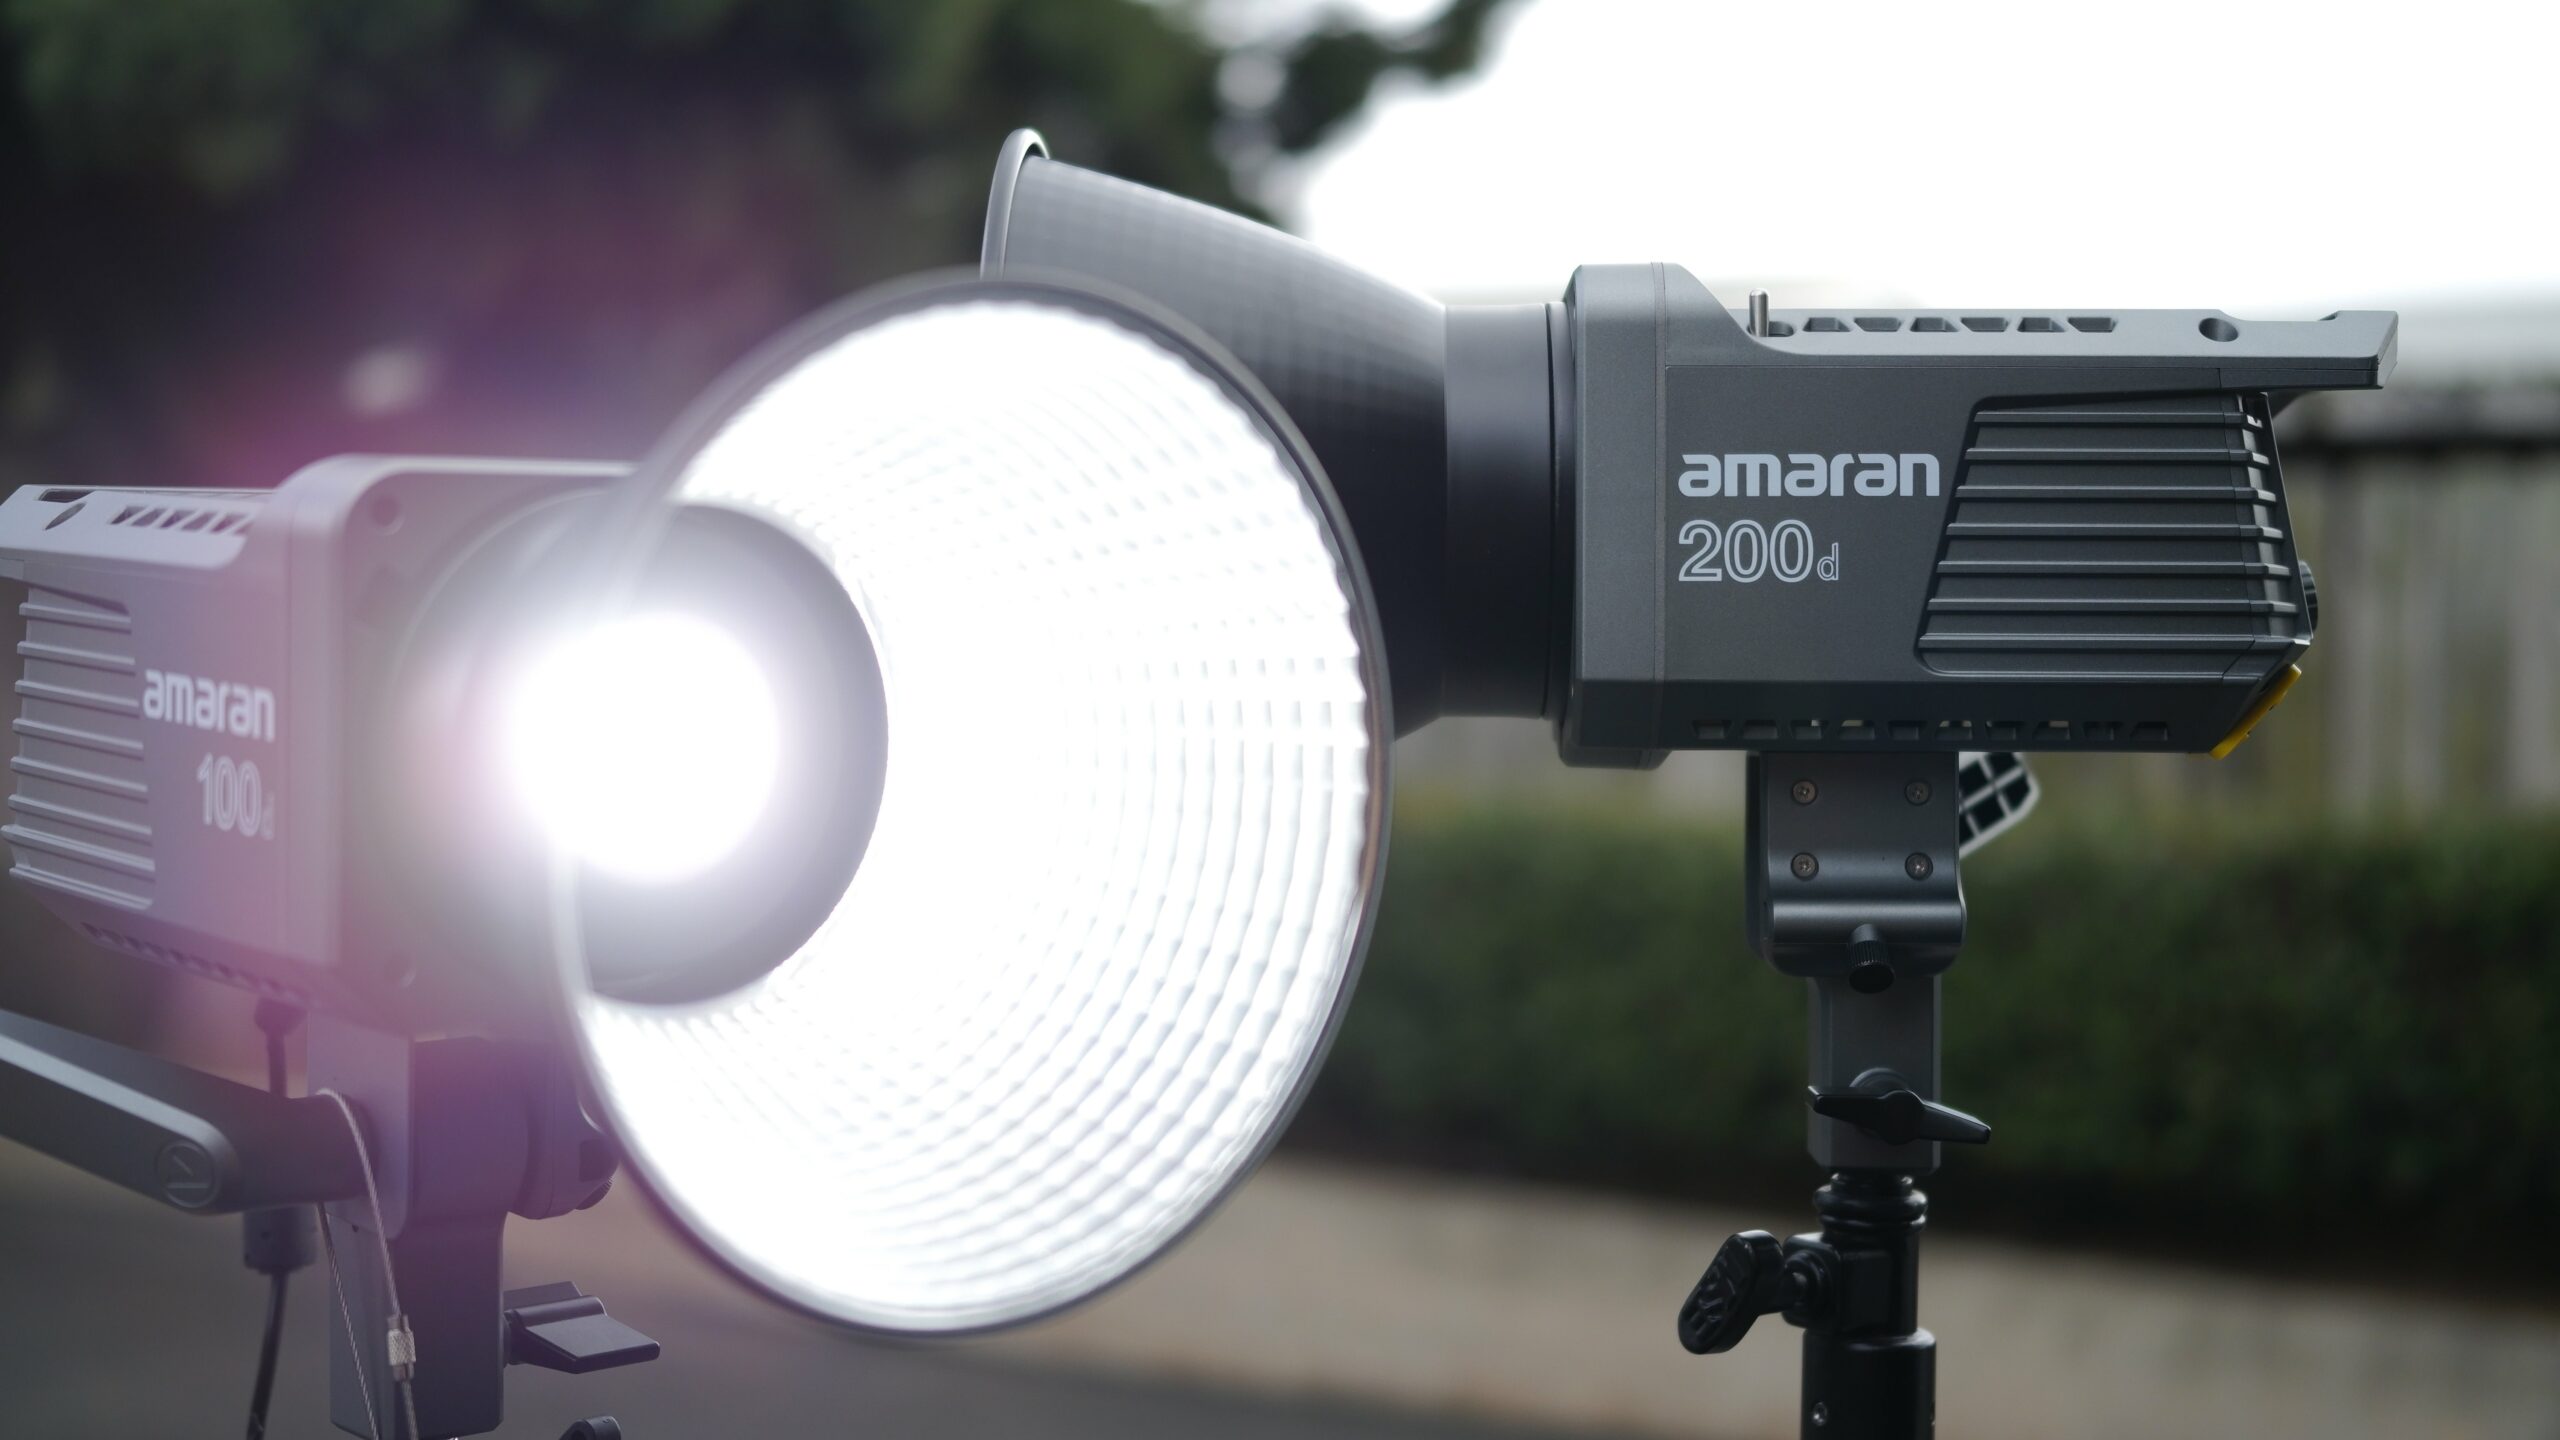 Amaran 100d and 200d Review - New Affordable LED Fixtures from